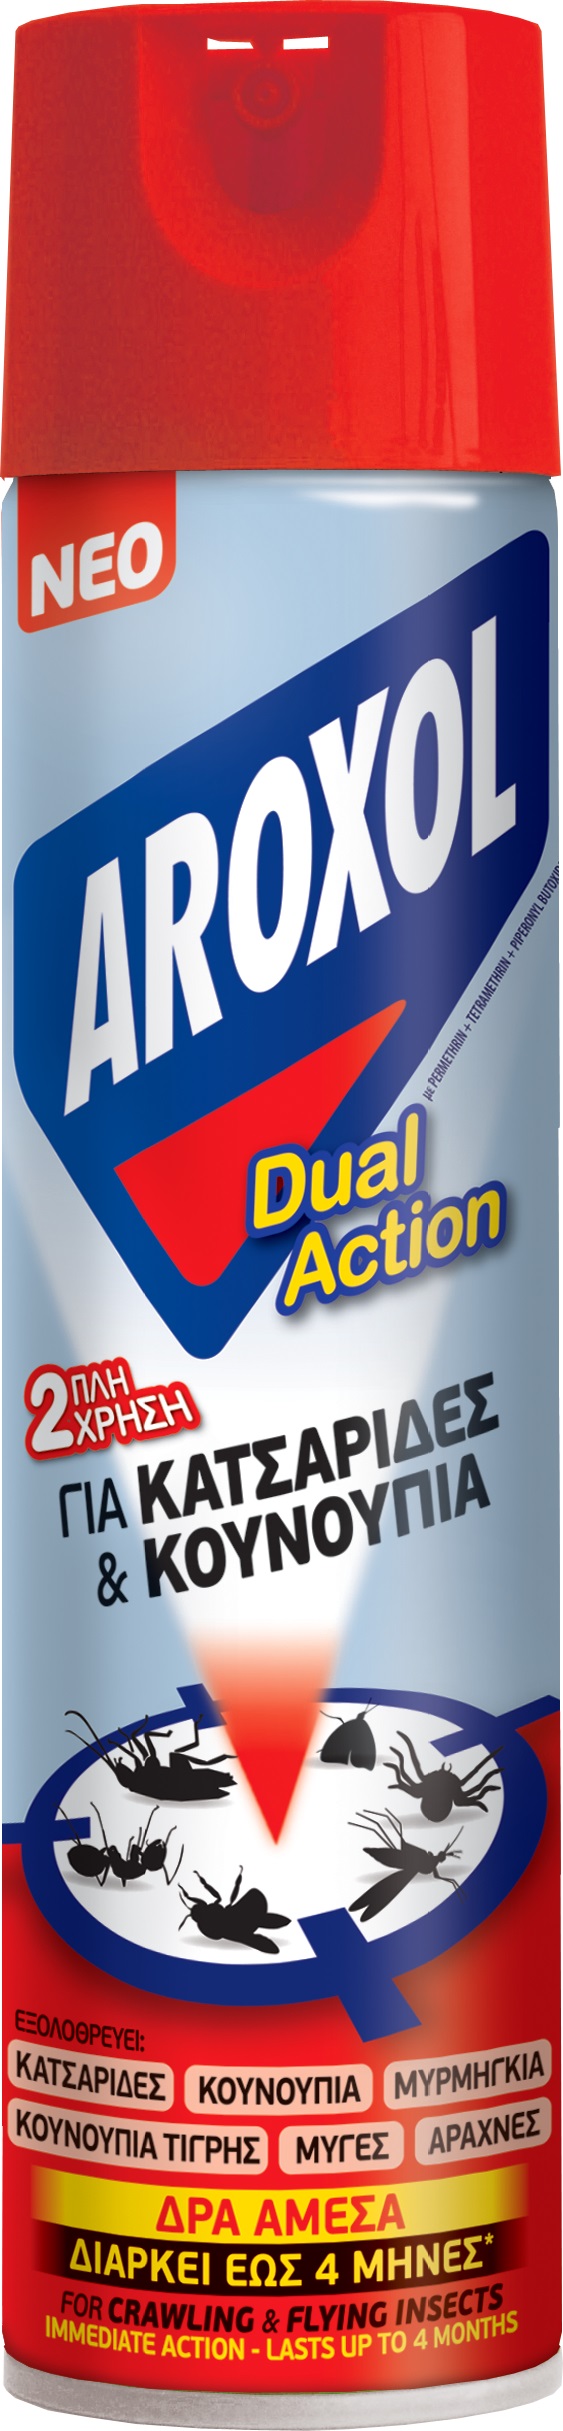 AROXOL DUAL ACTION 300ML